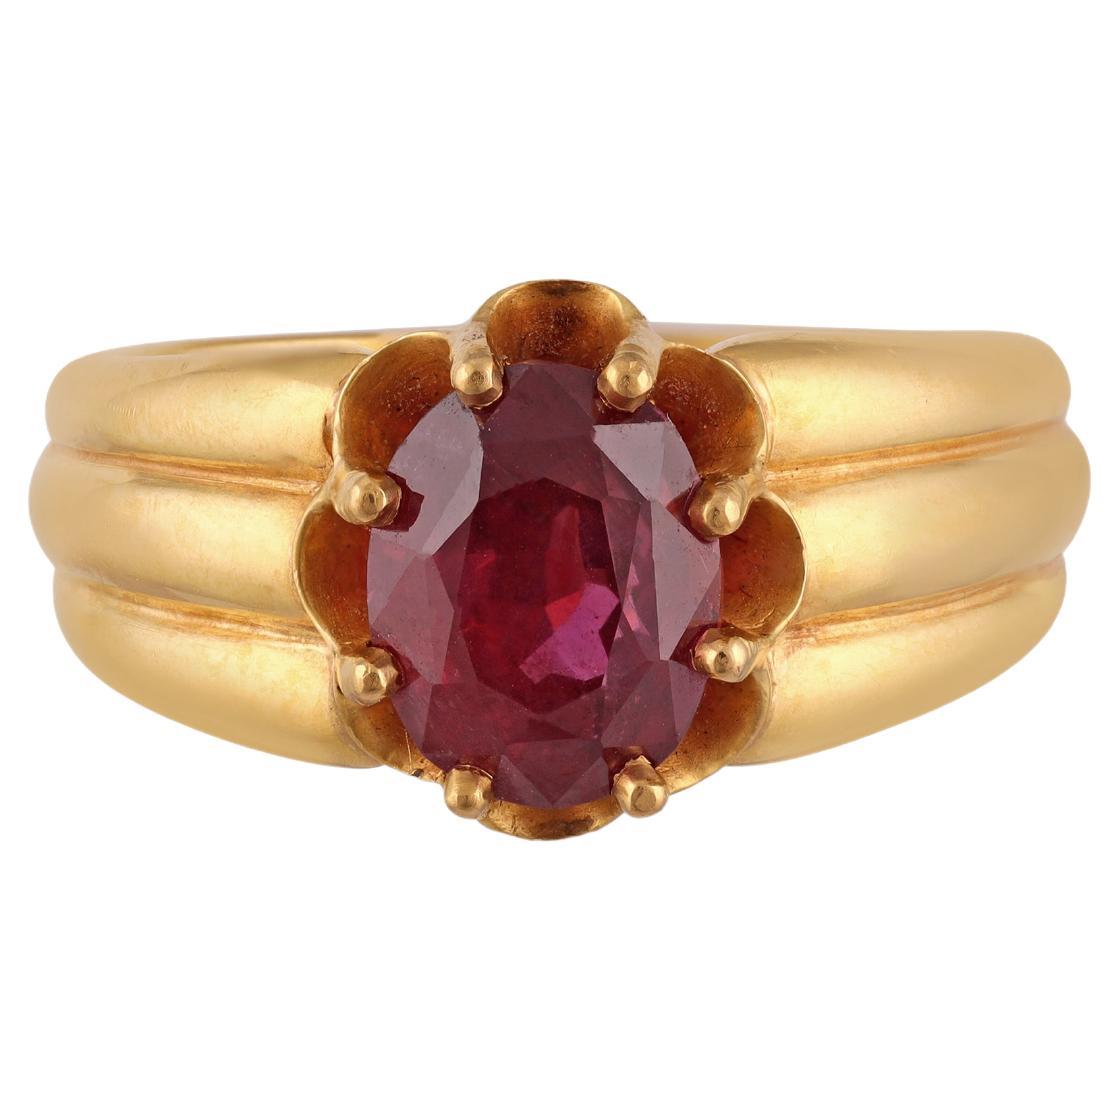 3.27 Carat High Clear Natural Mozambique Ruby Ring in 22k Gold